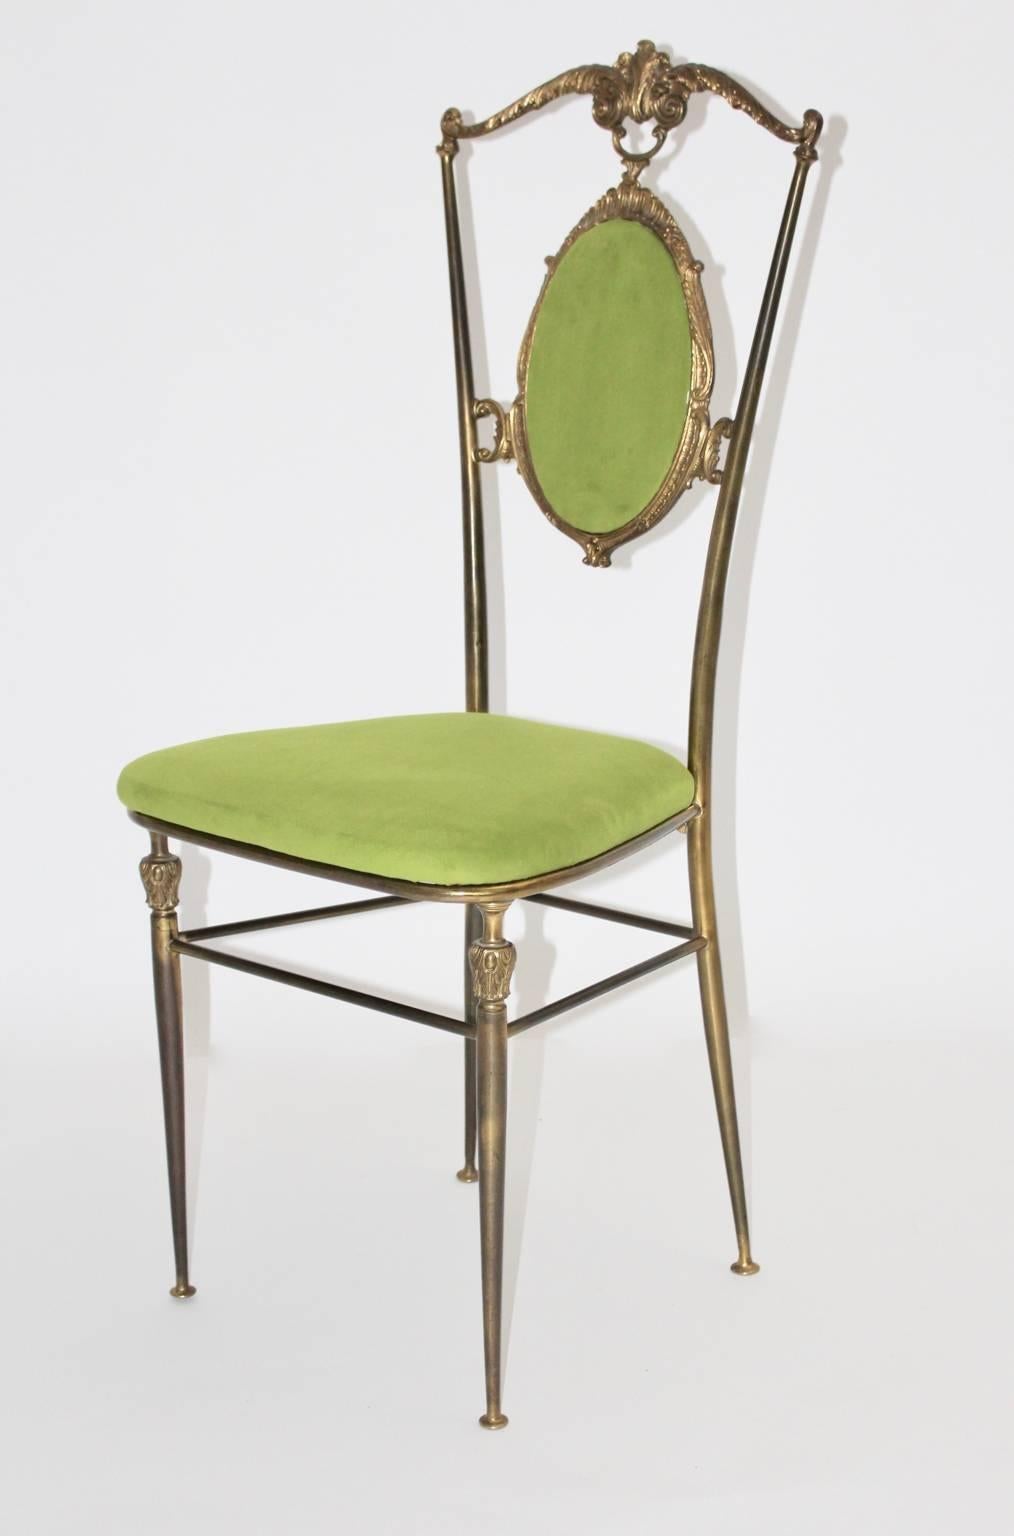 This Chiavari brass chair was designed and executed in the 1950s in Italy.
The back of the chair shows an upholstered medallion.
The seat and the back are newly covered with a light green velvet.

Measure: Seat height is 45.5 cm.
all measures are